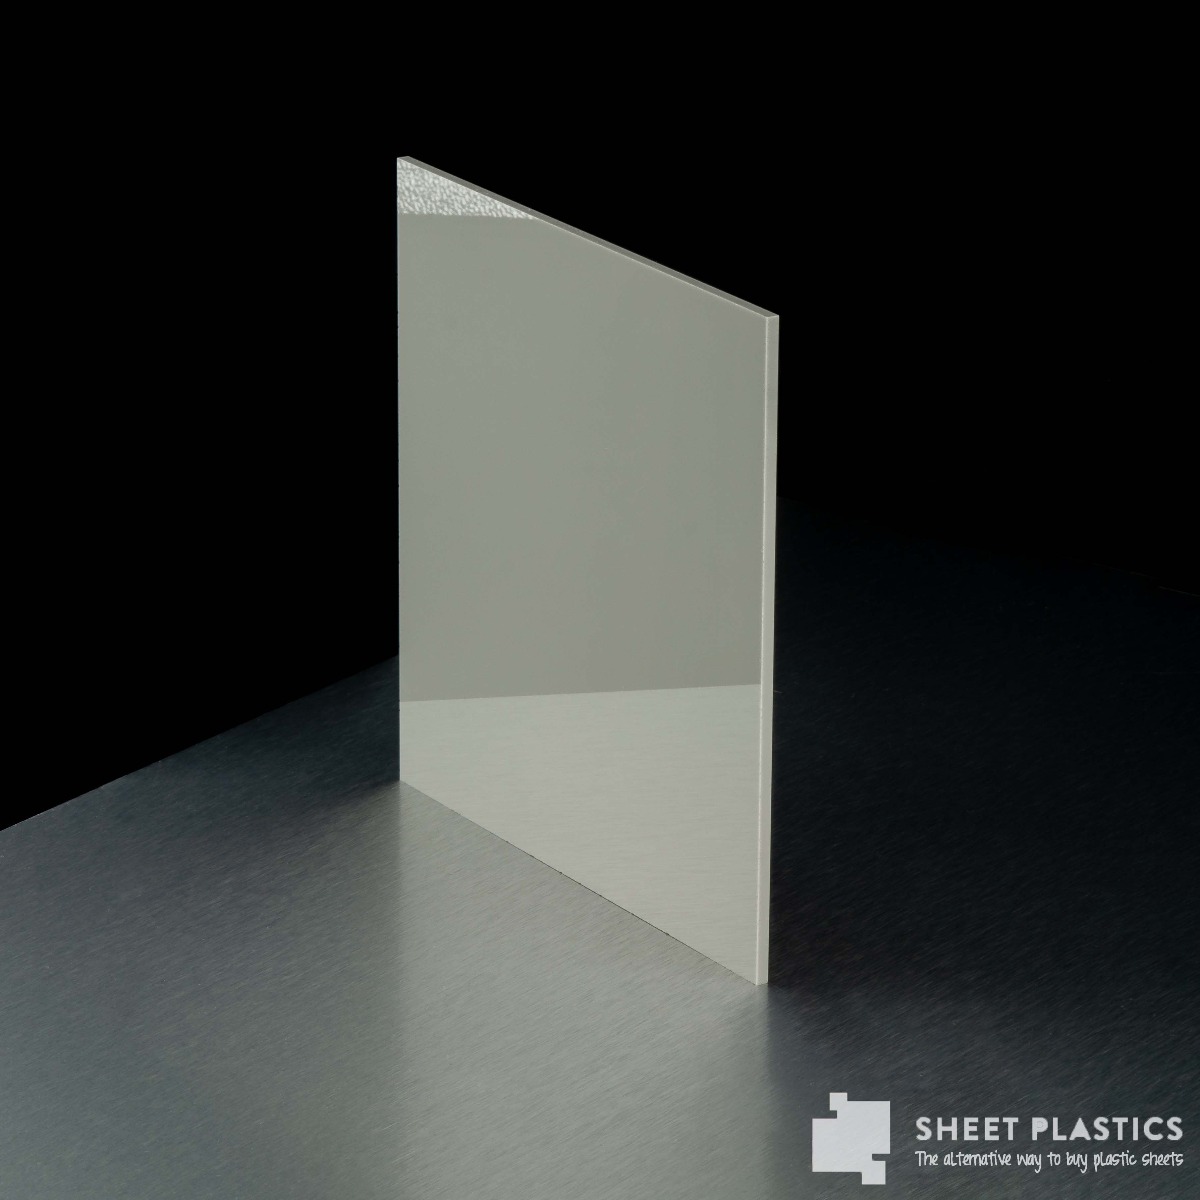 LIGHT GREY GLOSS ACRYLIC SHEETS IN VARIOUS SIZES